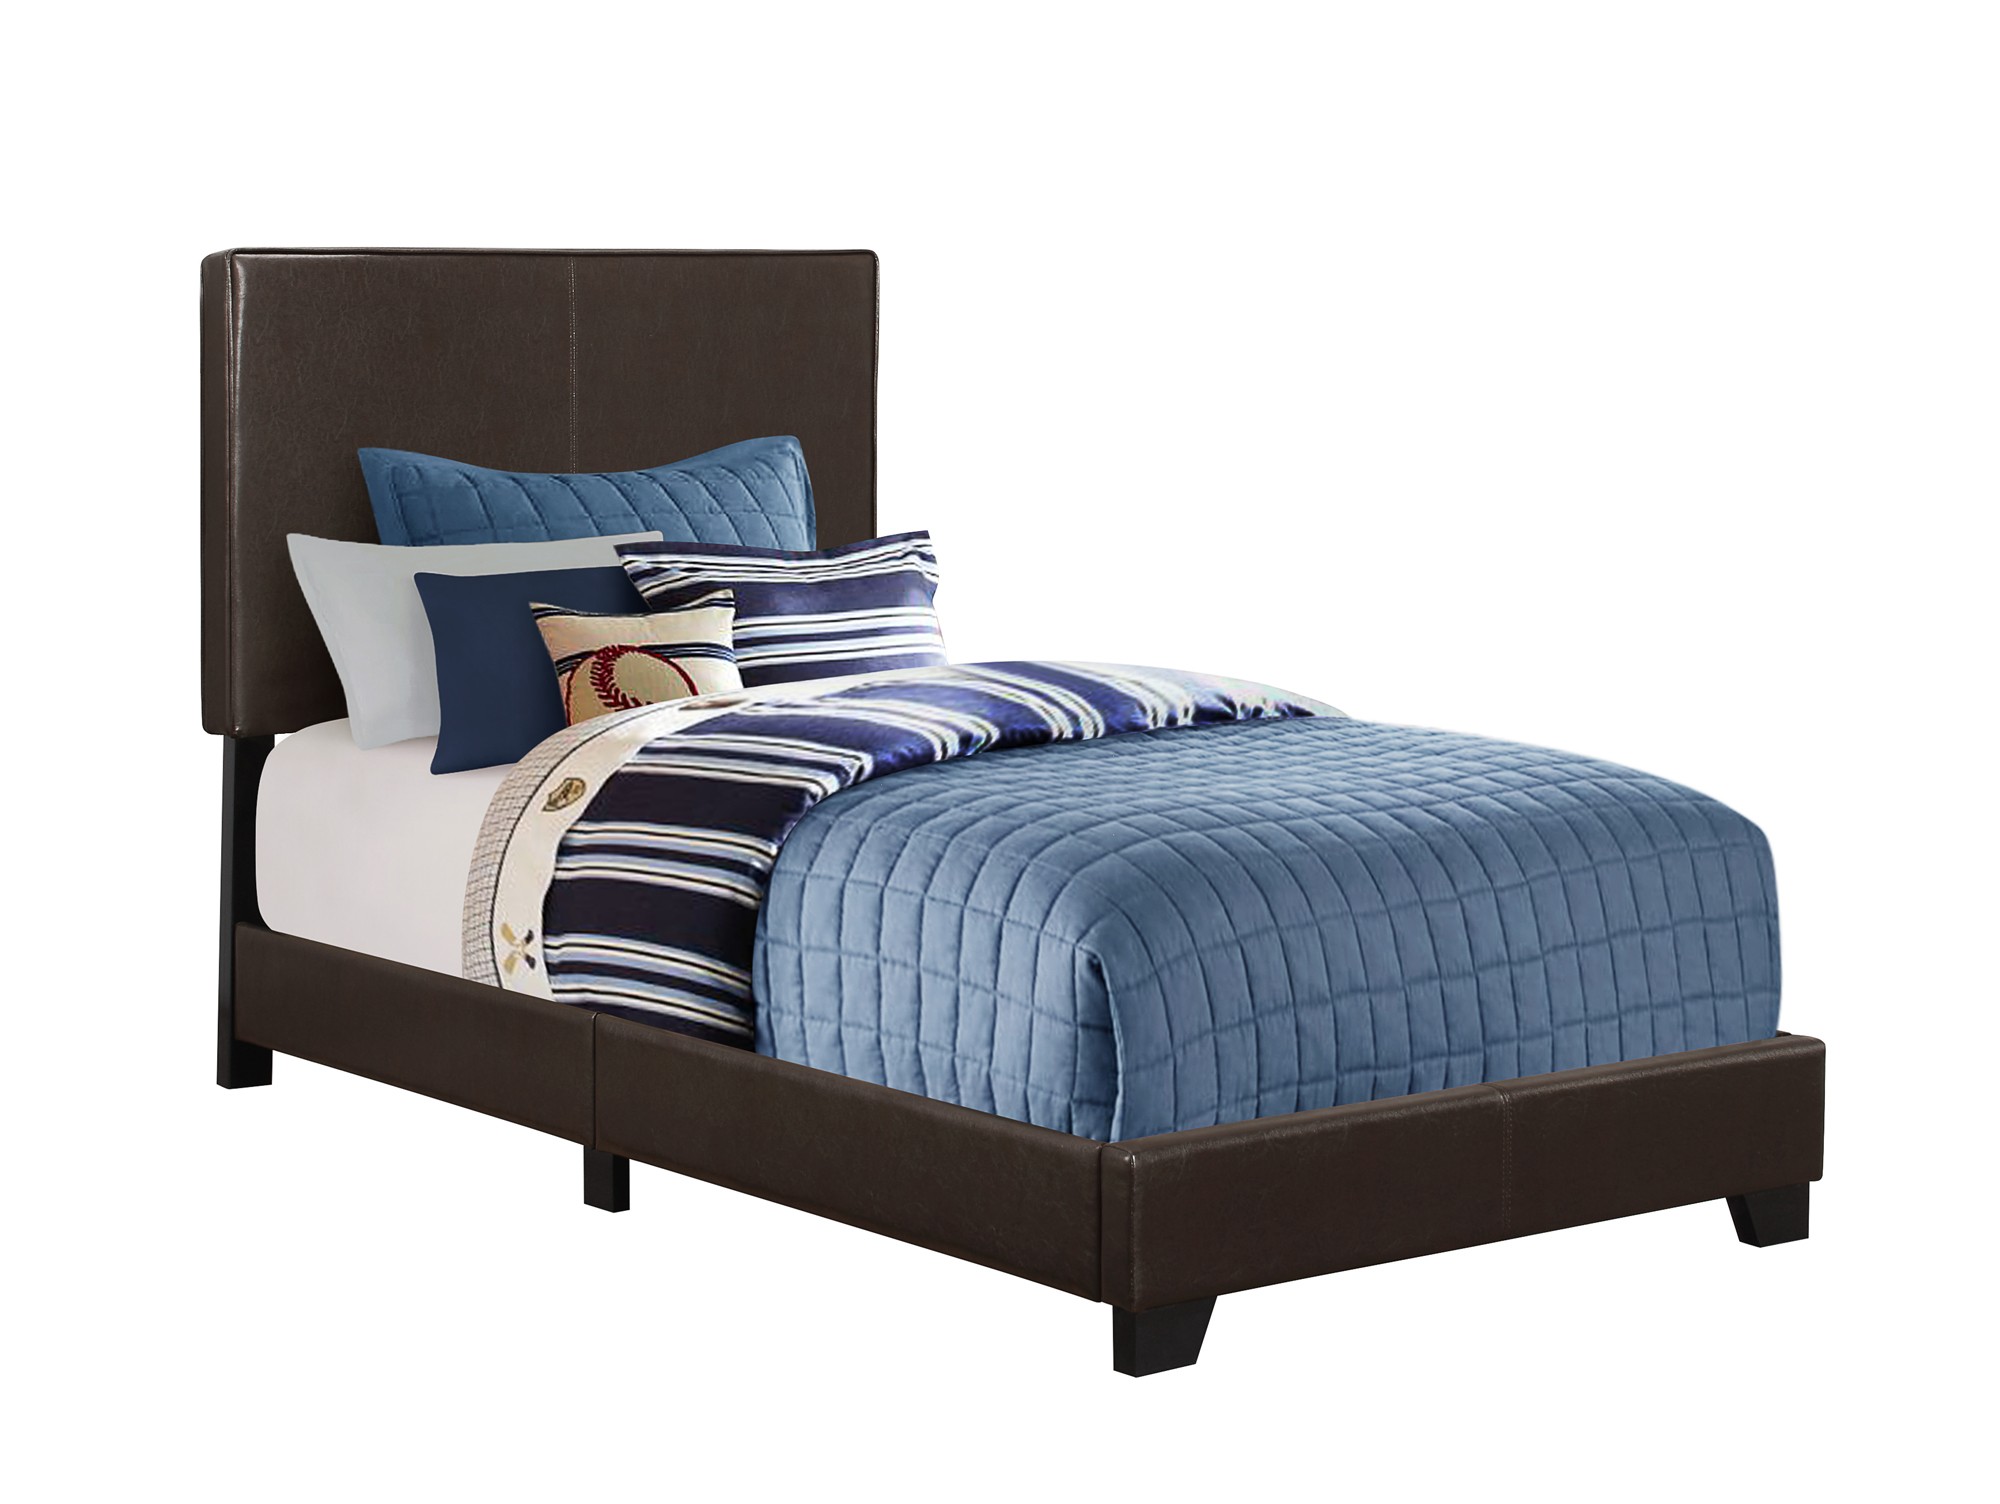 BED - TWIN SIZE / DARK BROWN LEATHER-LOOK